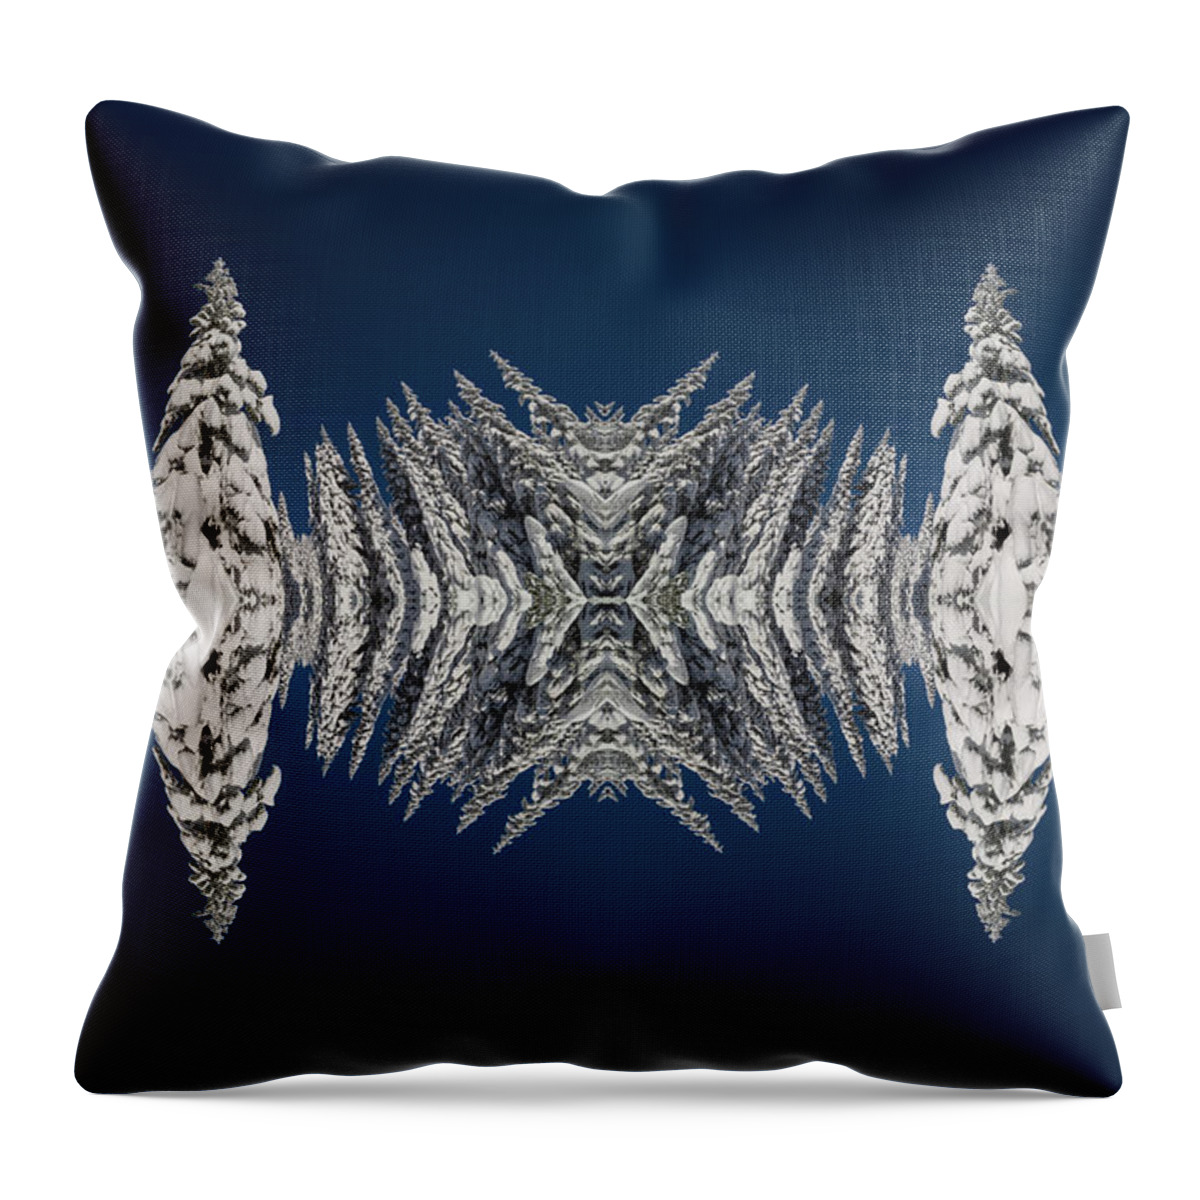 Frost Throw Pillow featuring the digital art Snow Covered Trees Kaleidoscope by Pelo Blanco Photo